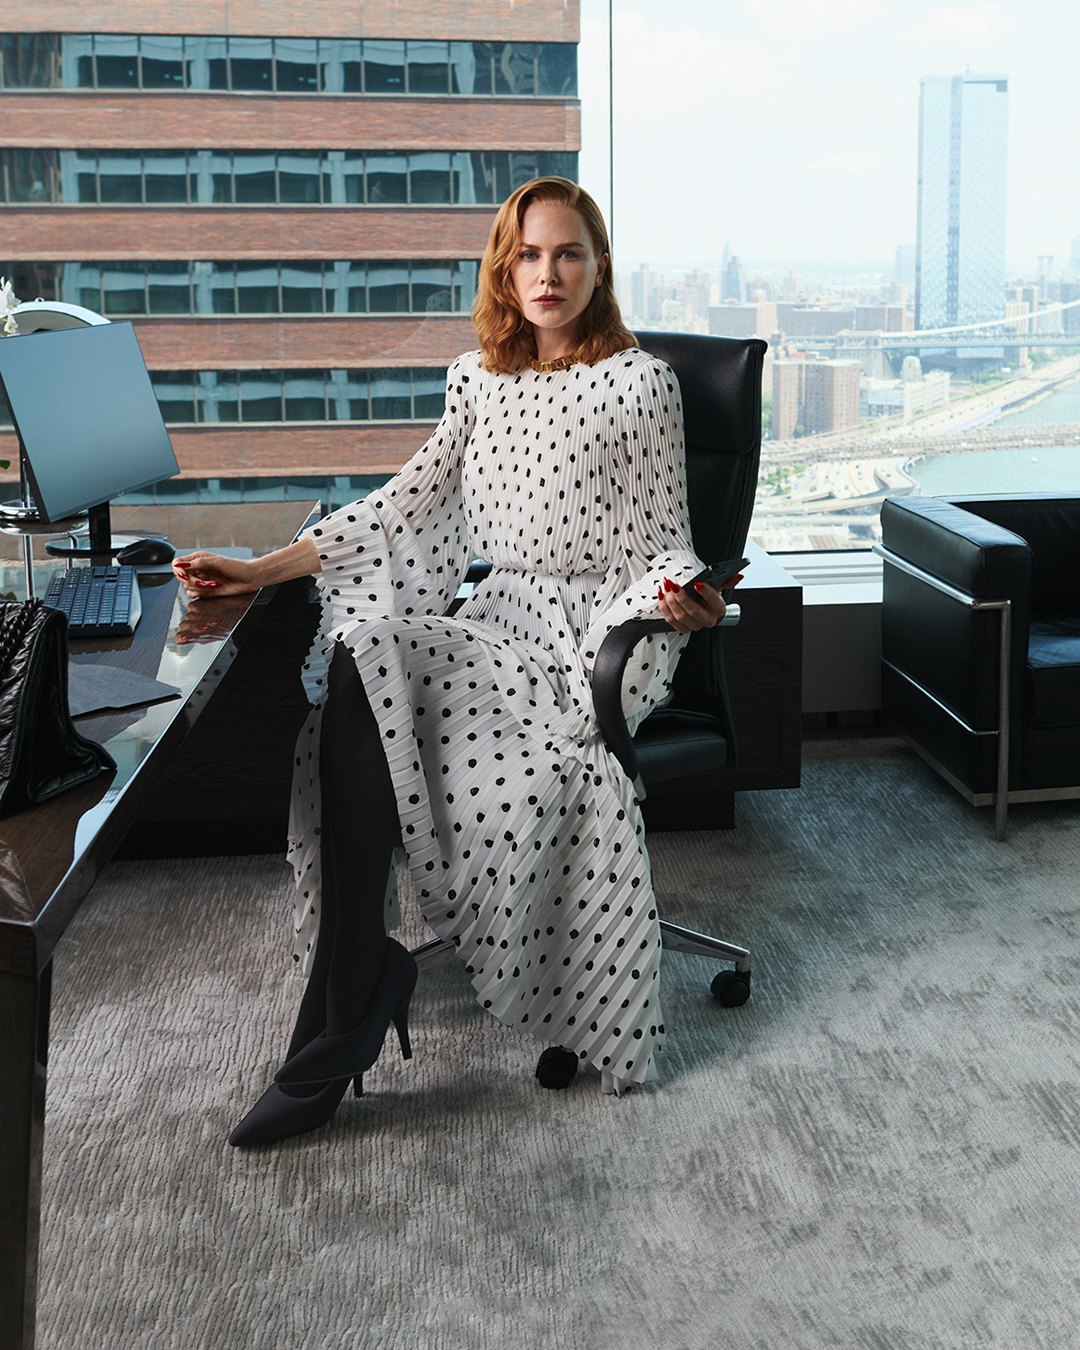 Nicole Kidman Heads to the Office in New Balenciaga Campaign